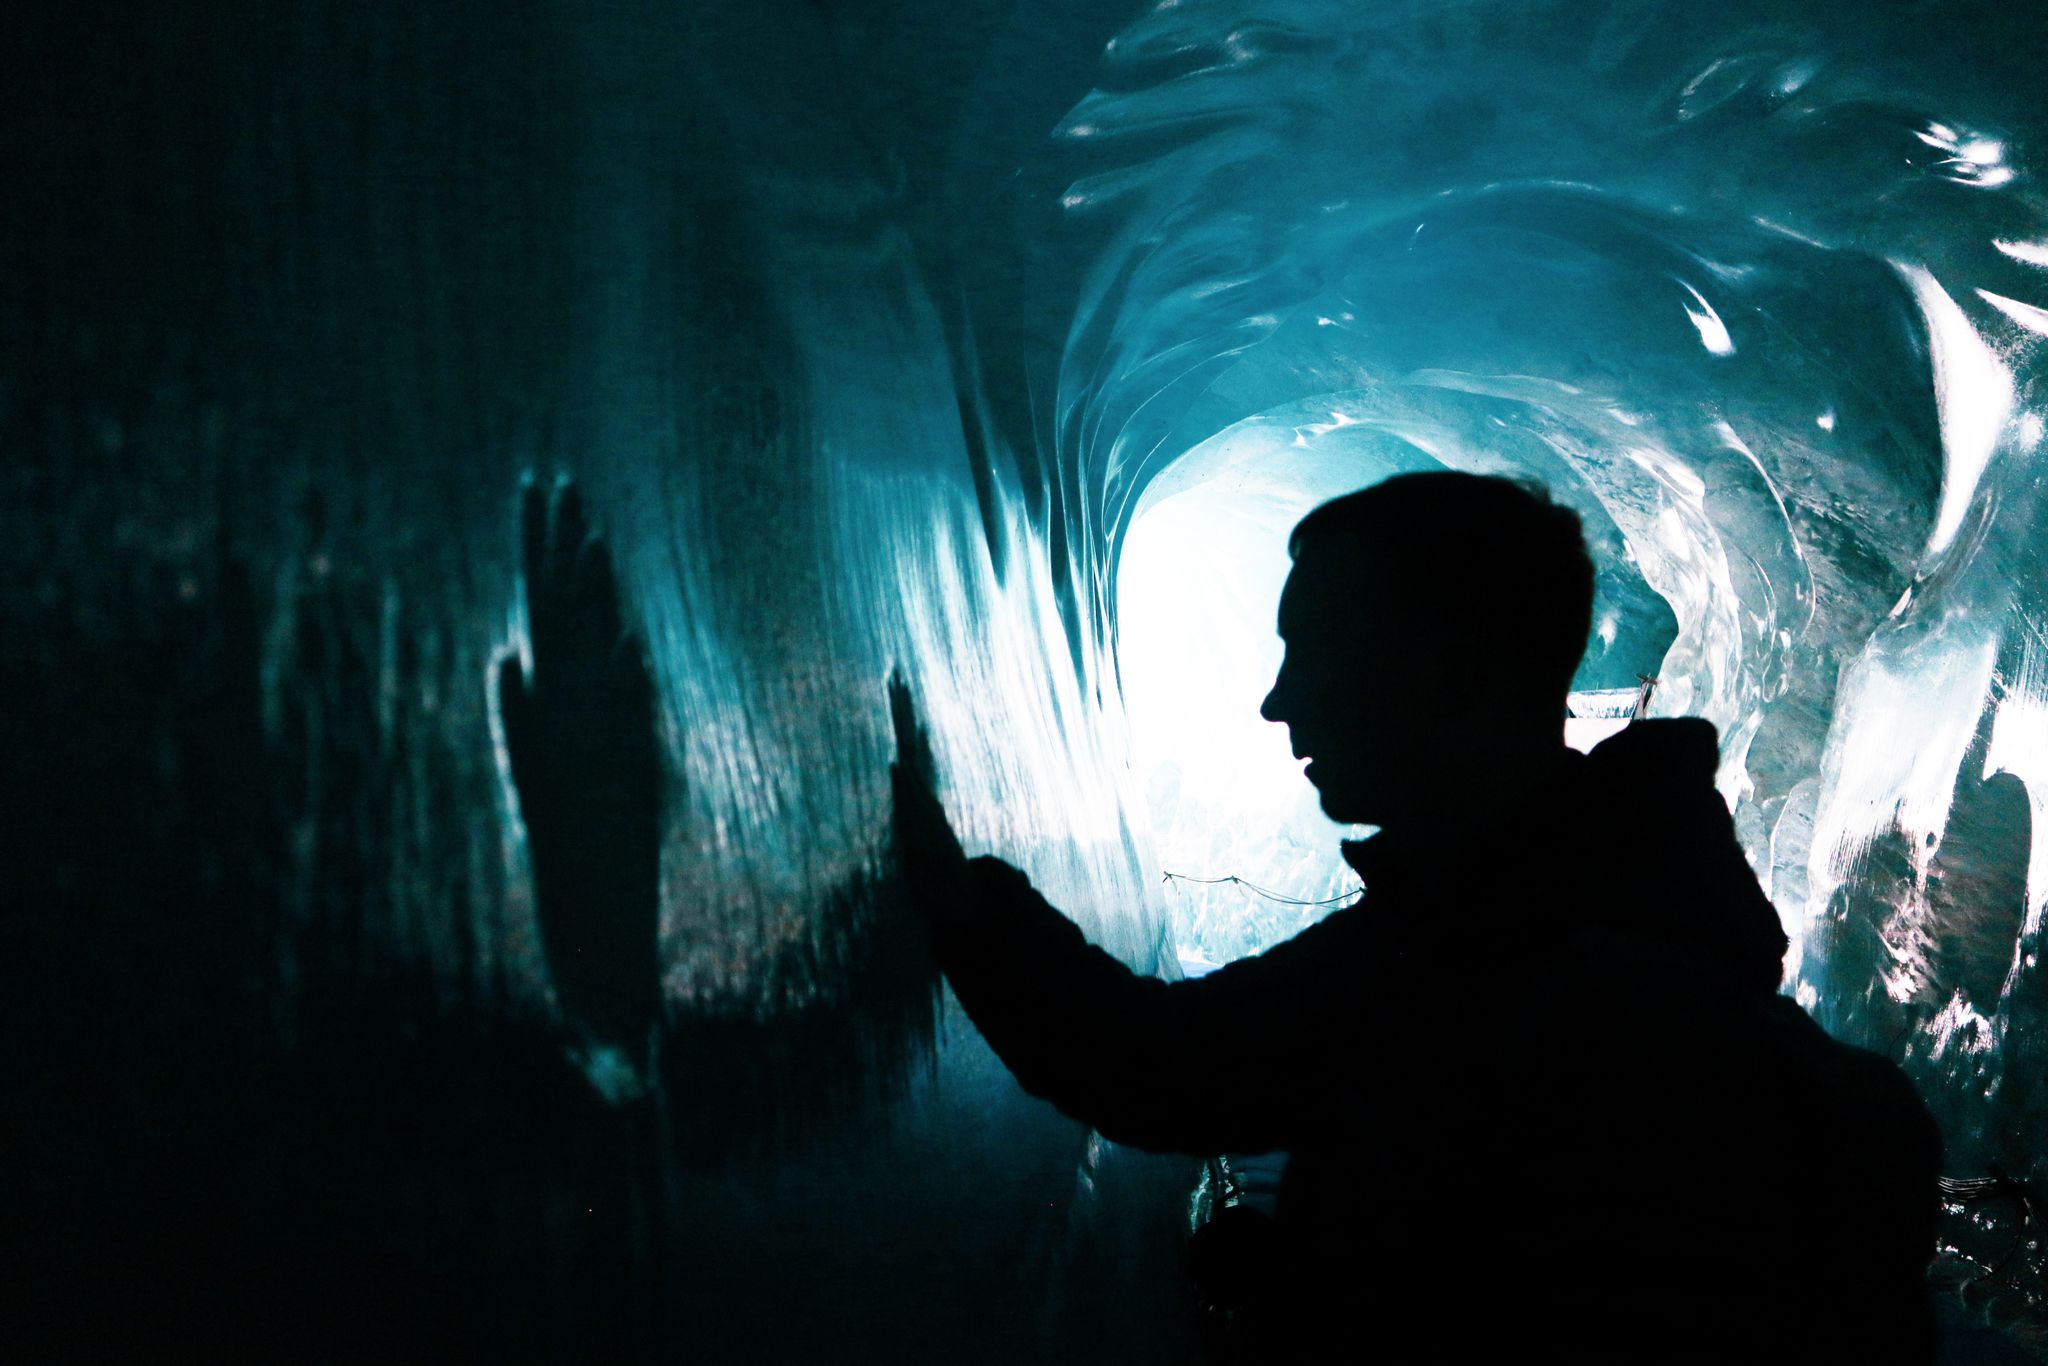 Winning entry shows shadowy glacier tunnel with a person holding their hands to the ice